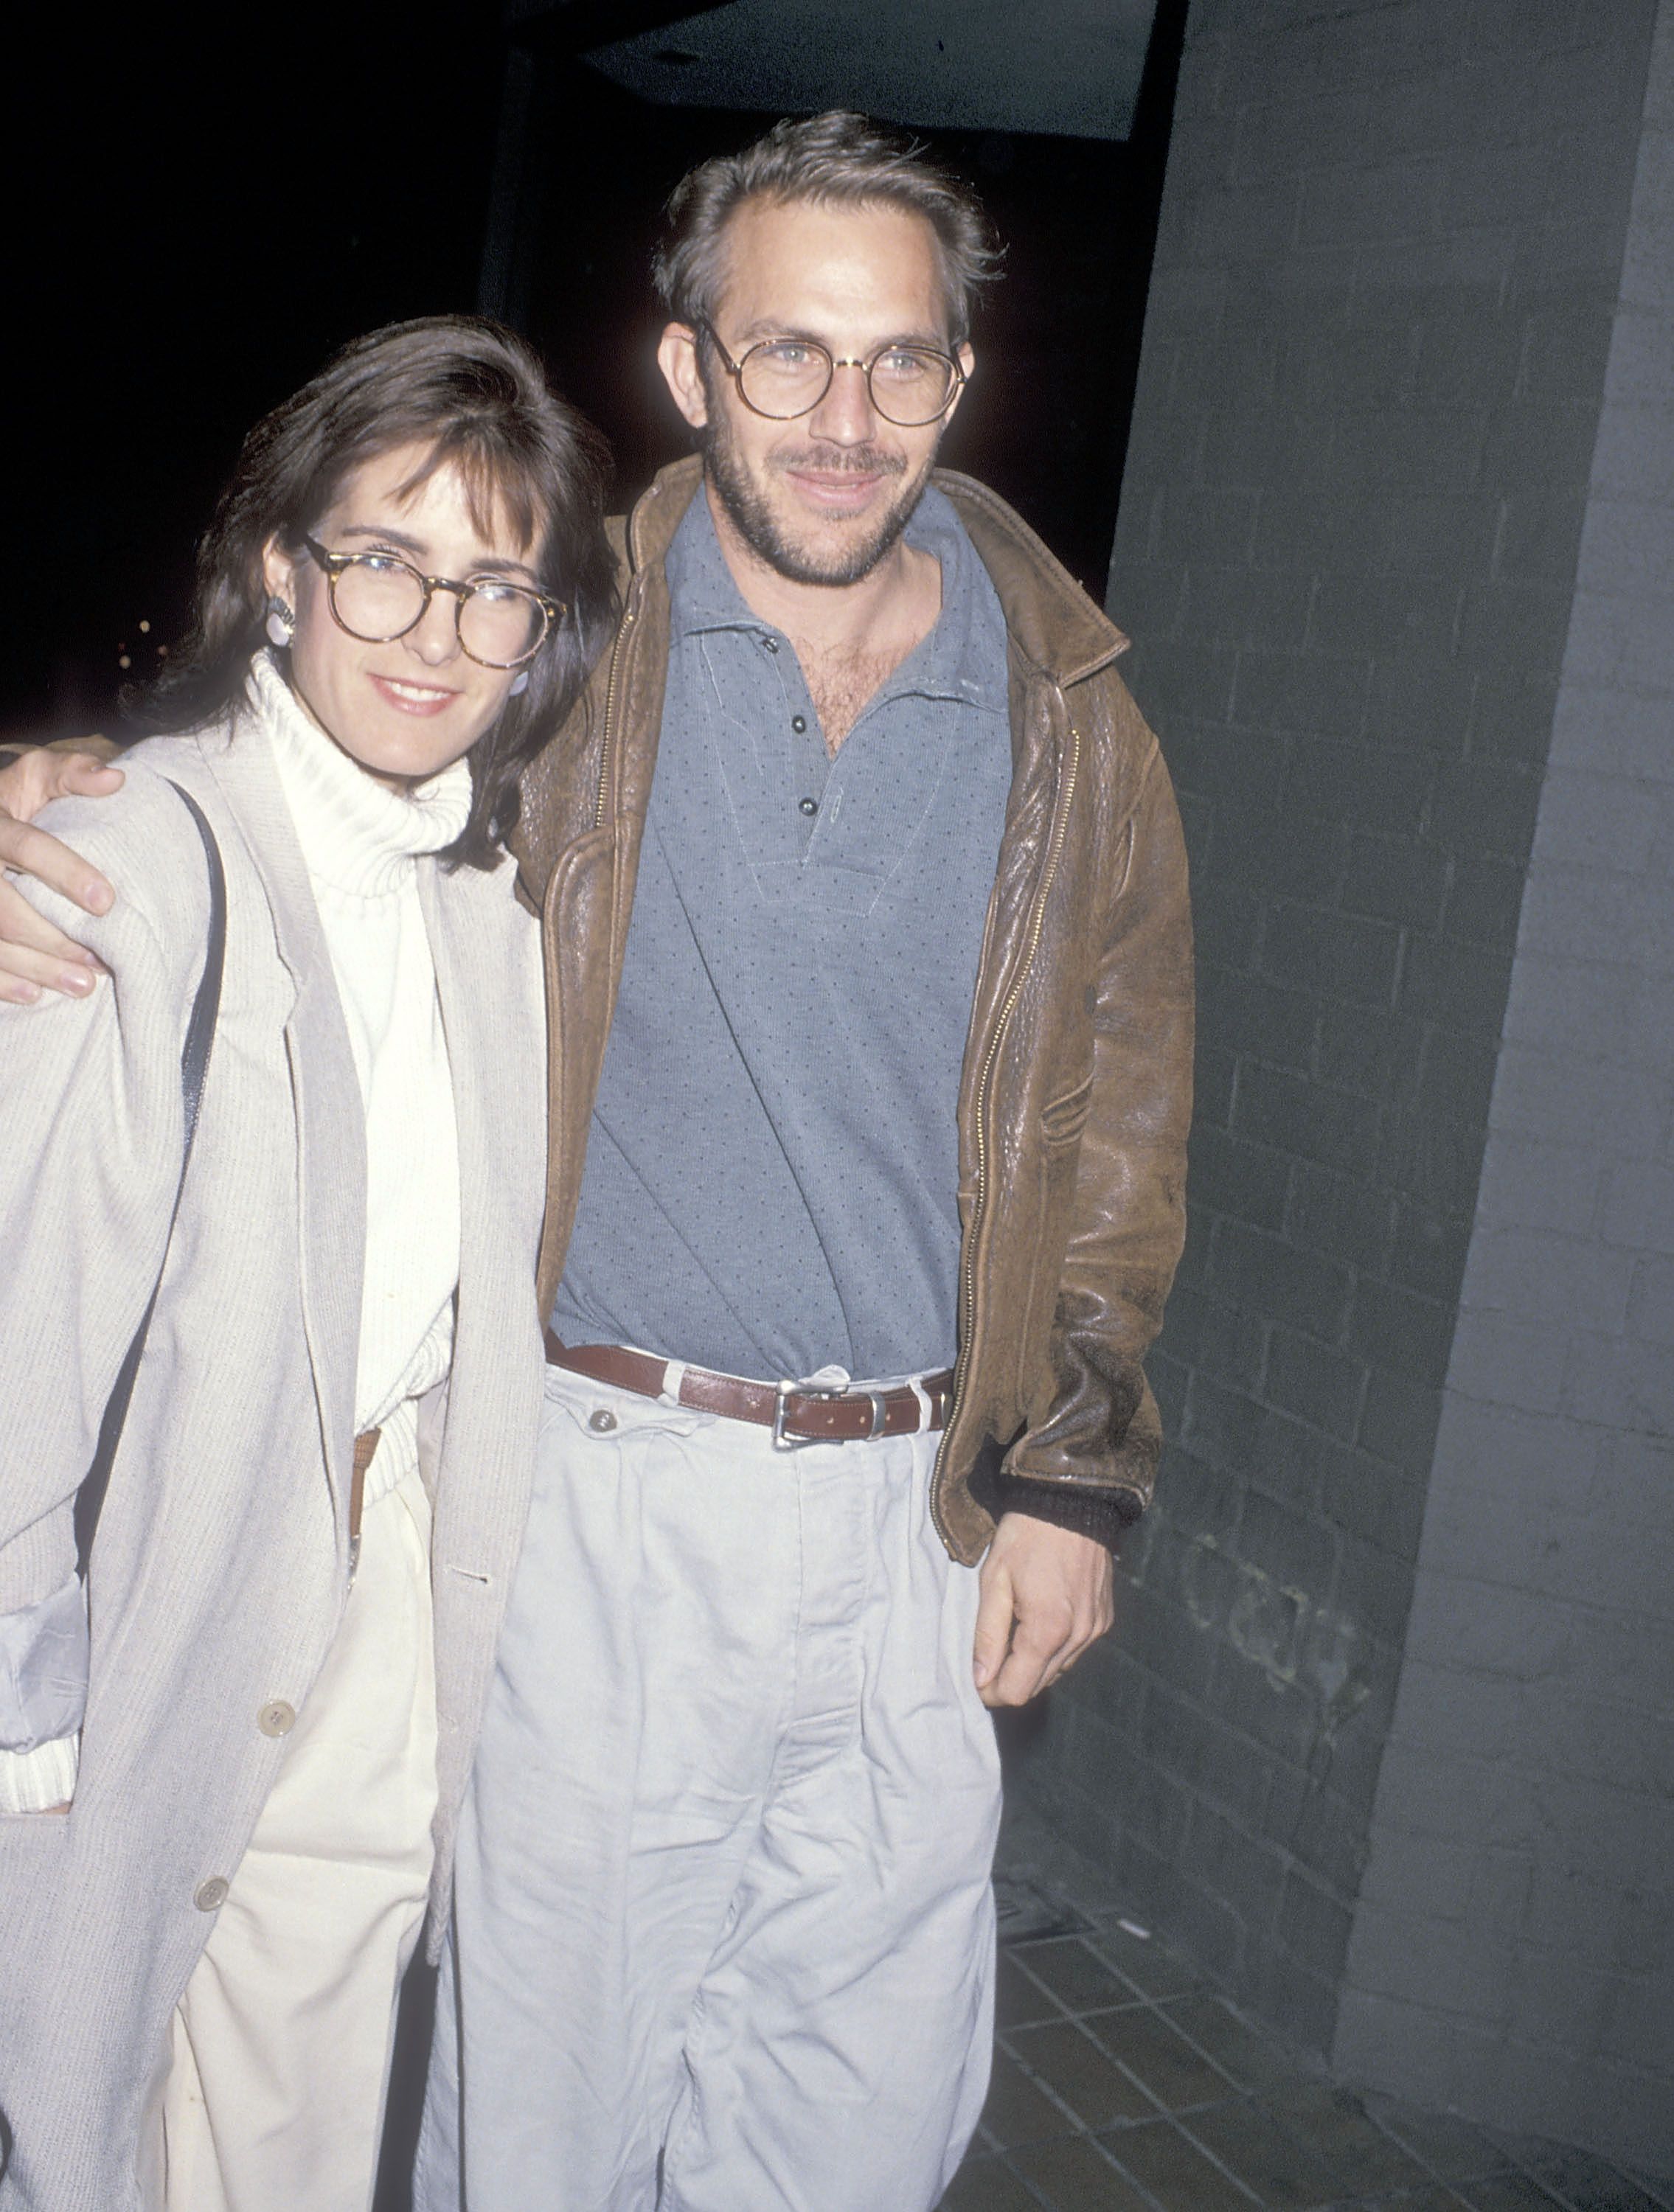 Kevin Costner and ex-wife Cindy Costner attend a performance of the play "Hurlyburly" on January 13, 1989 at the Westwood Playhouse in Westwood, California. | Source: Getty Images